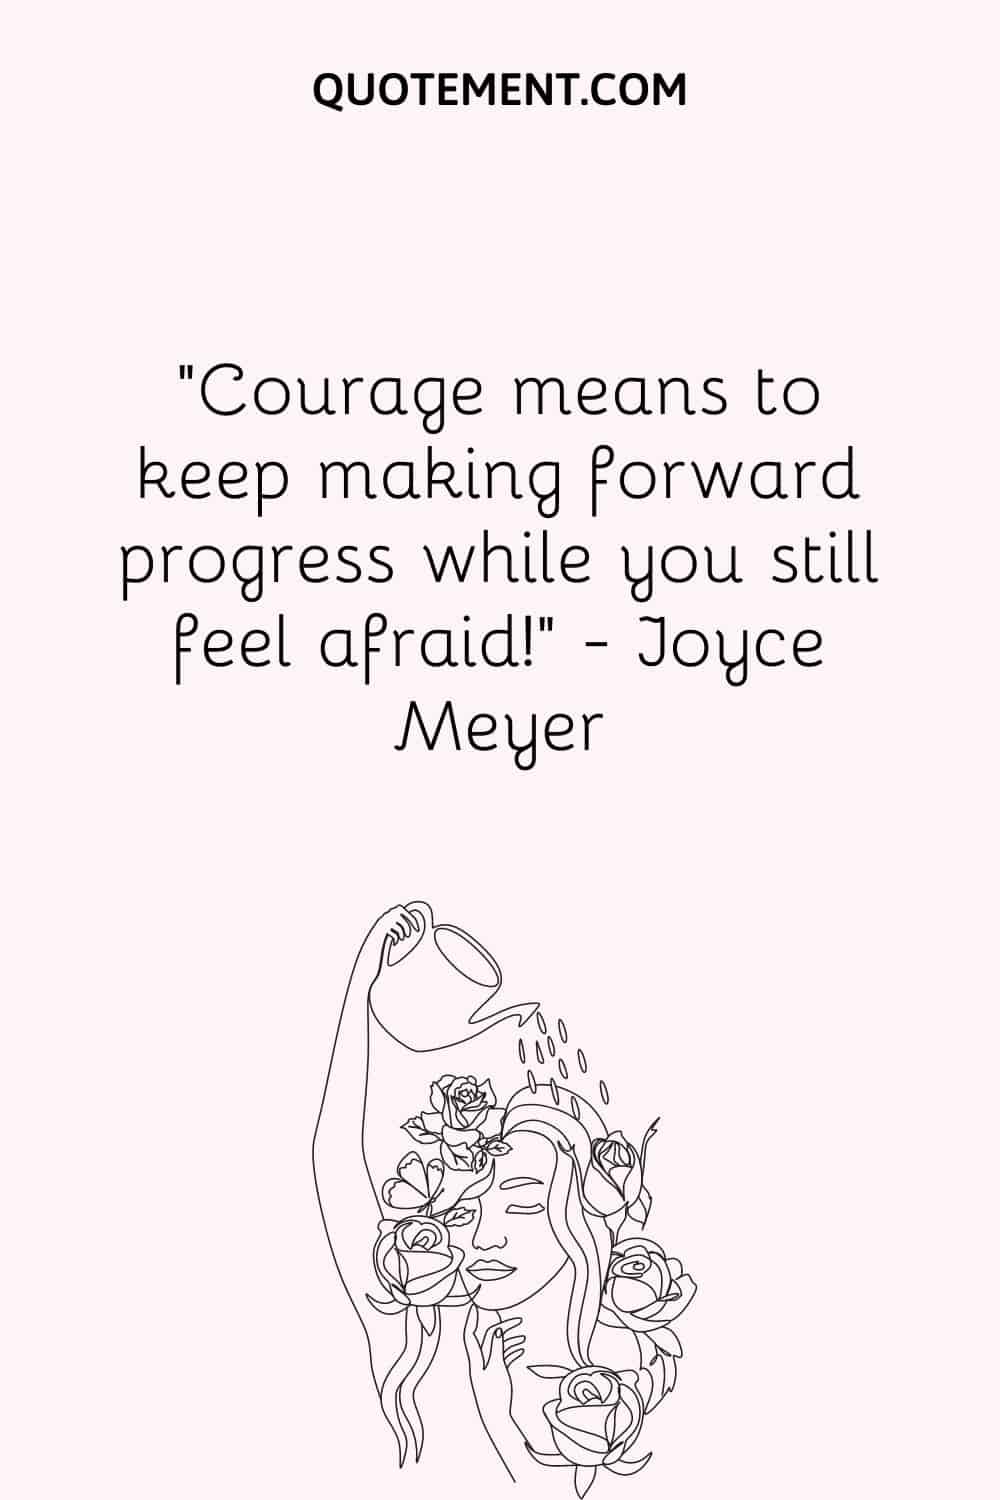 Courage means to keep making forward progress while you still feel afraid